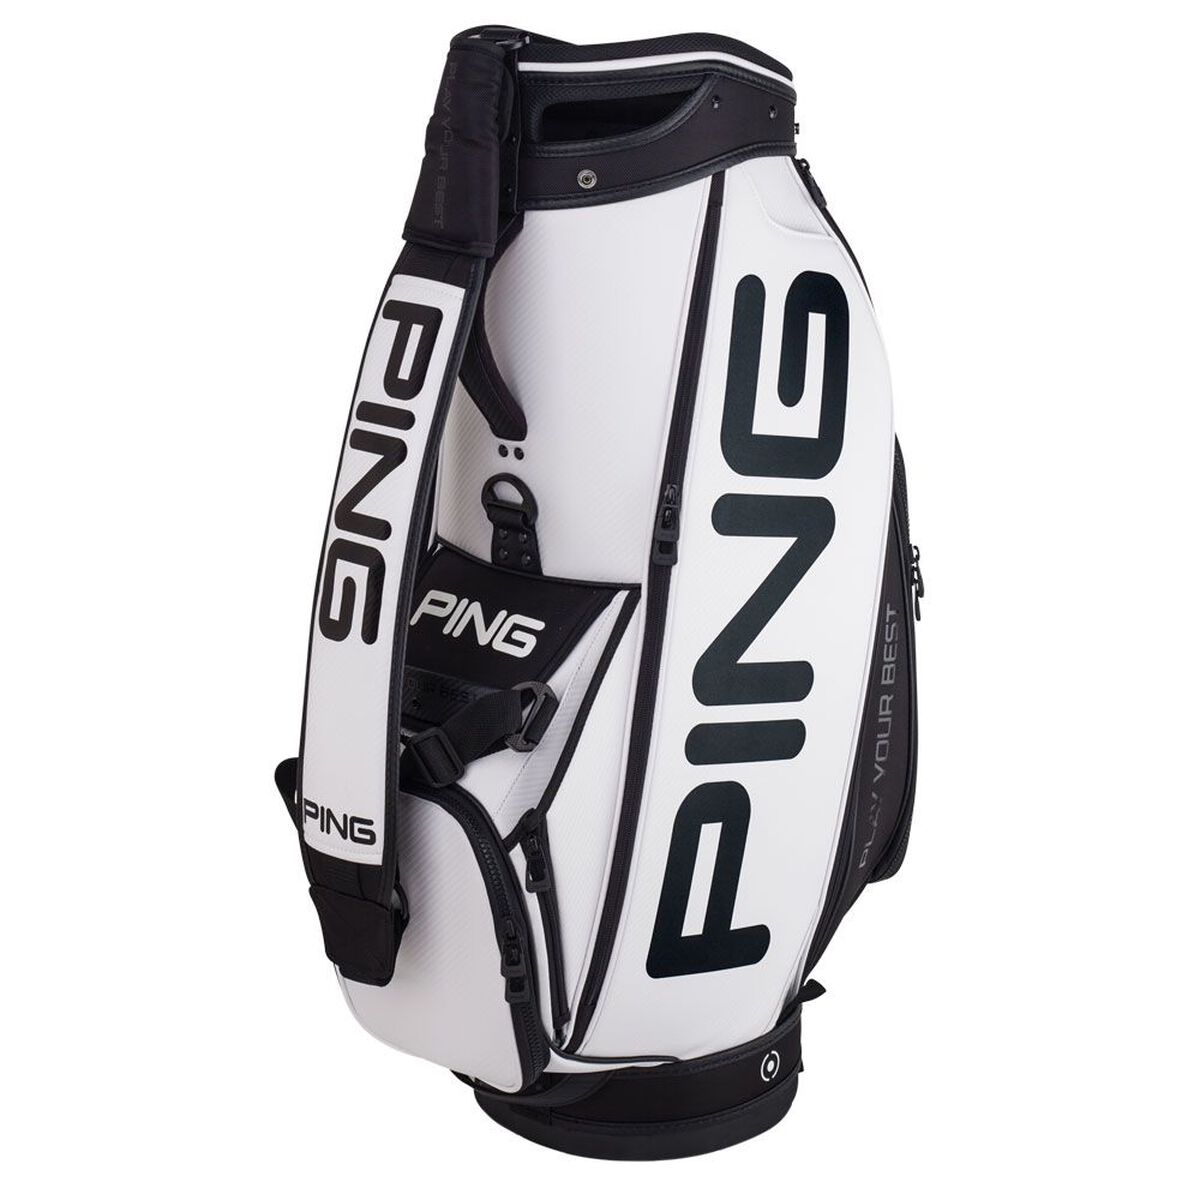 Ping White and Black Tour Golf Staff Bag | American Golf, One Size